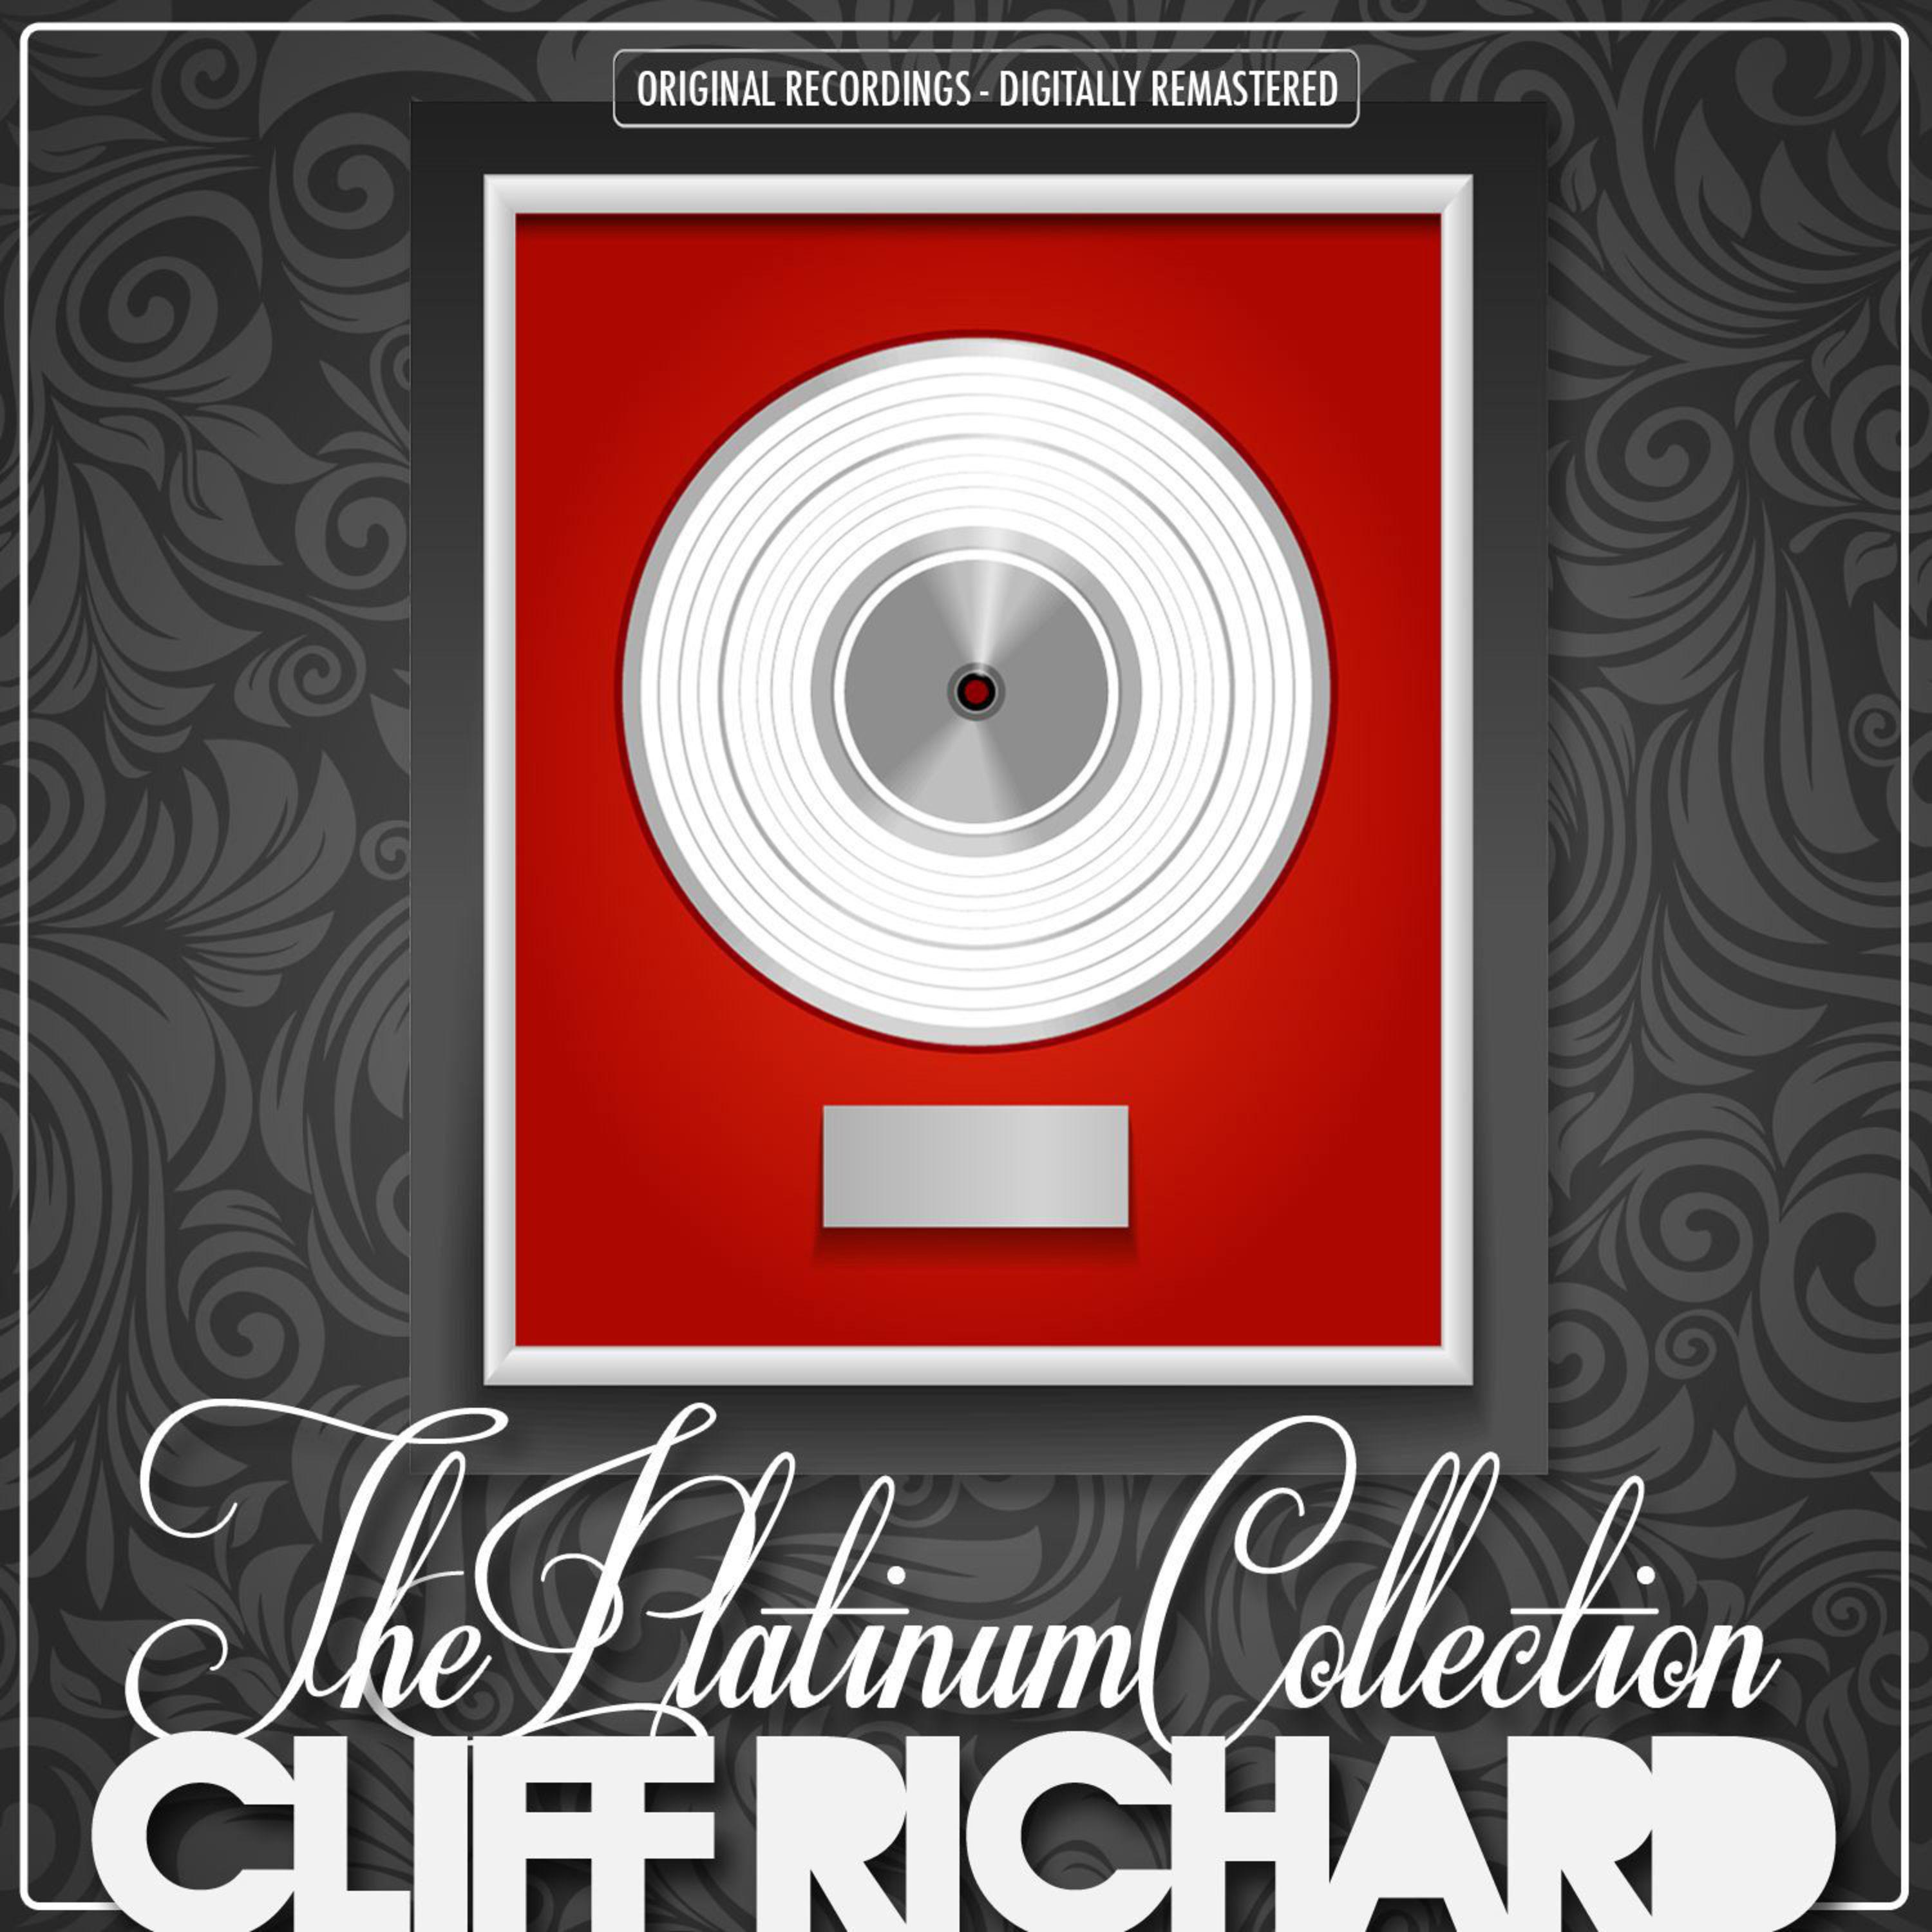 The Platinum Collection: Cliff Richard